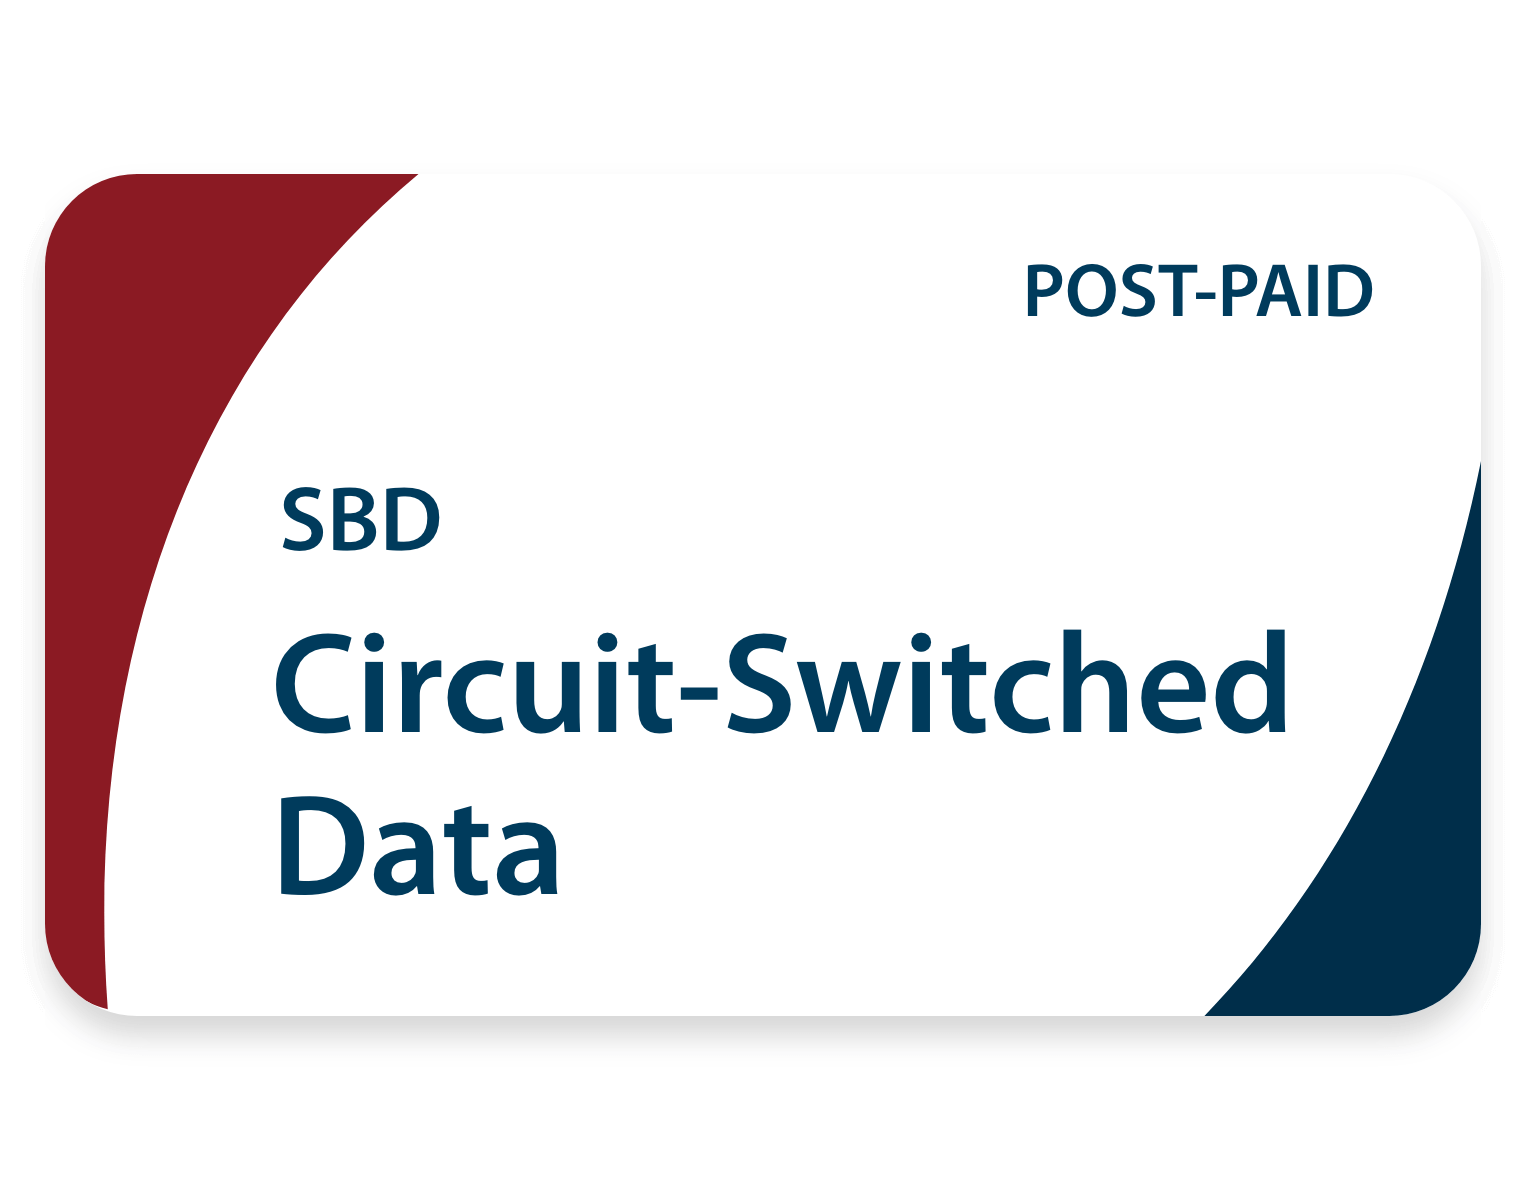 Circuit switched data (SBD) post-paid airtime plan